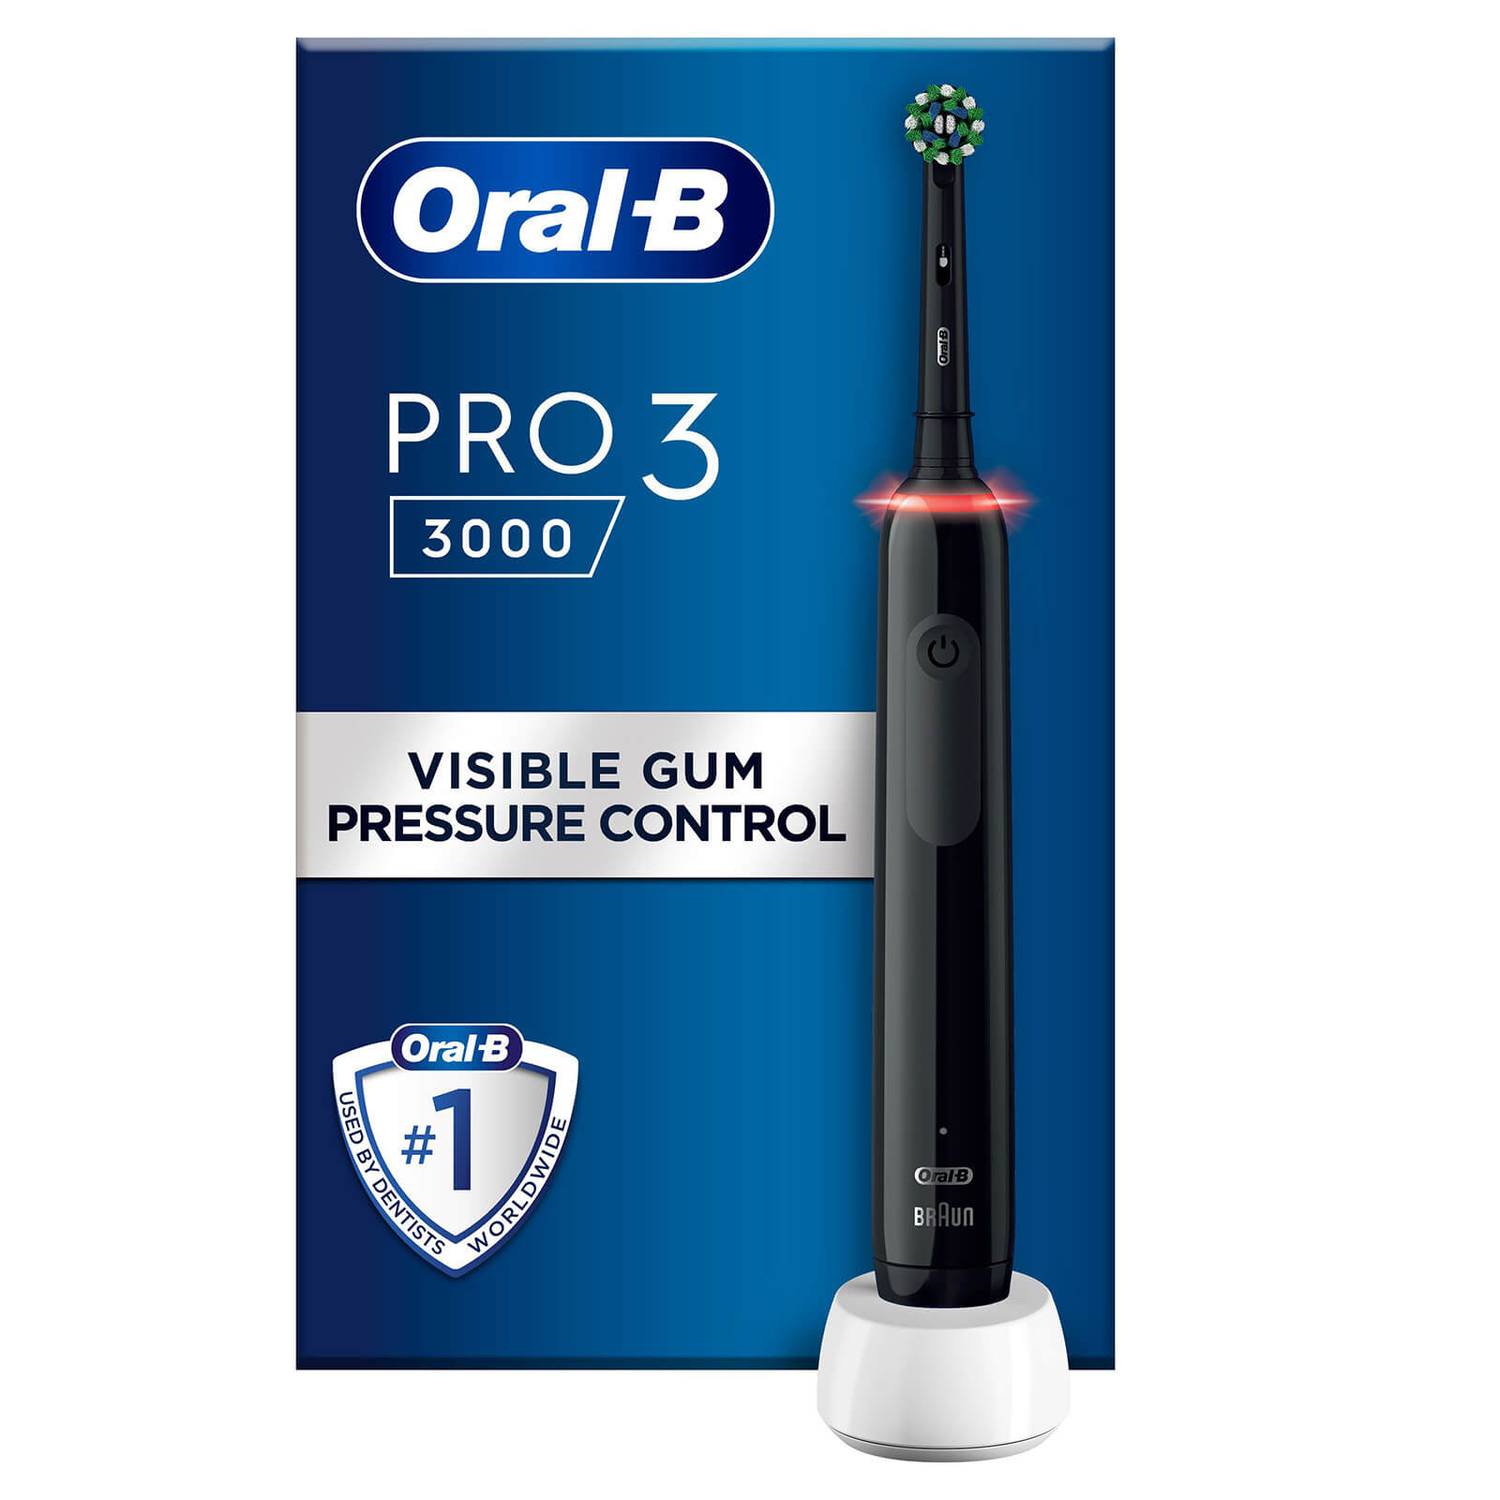 Oral B Pro 3 3000 Electric Toothbrush with Smart Pressure Sensor & 2 Brush Heads